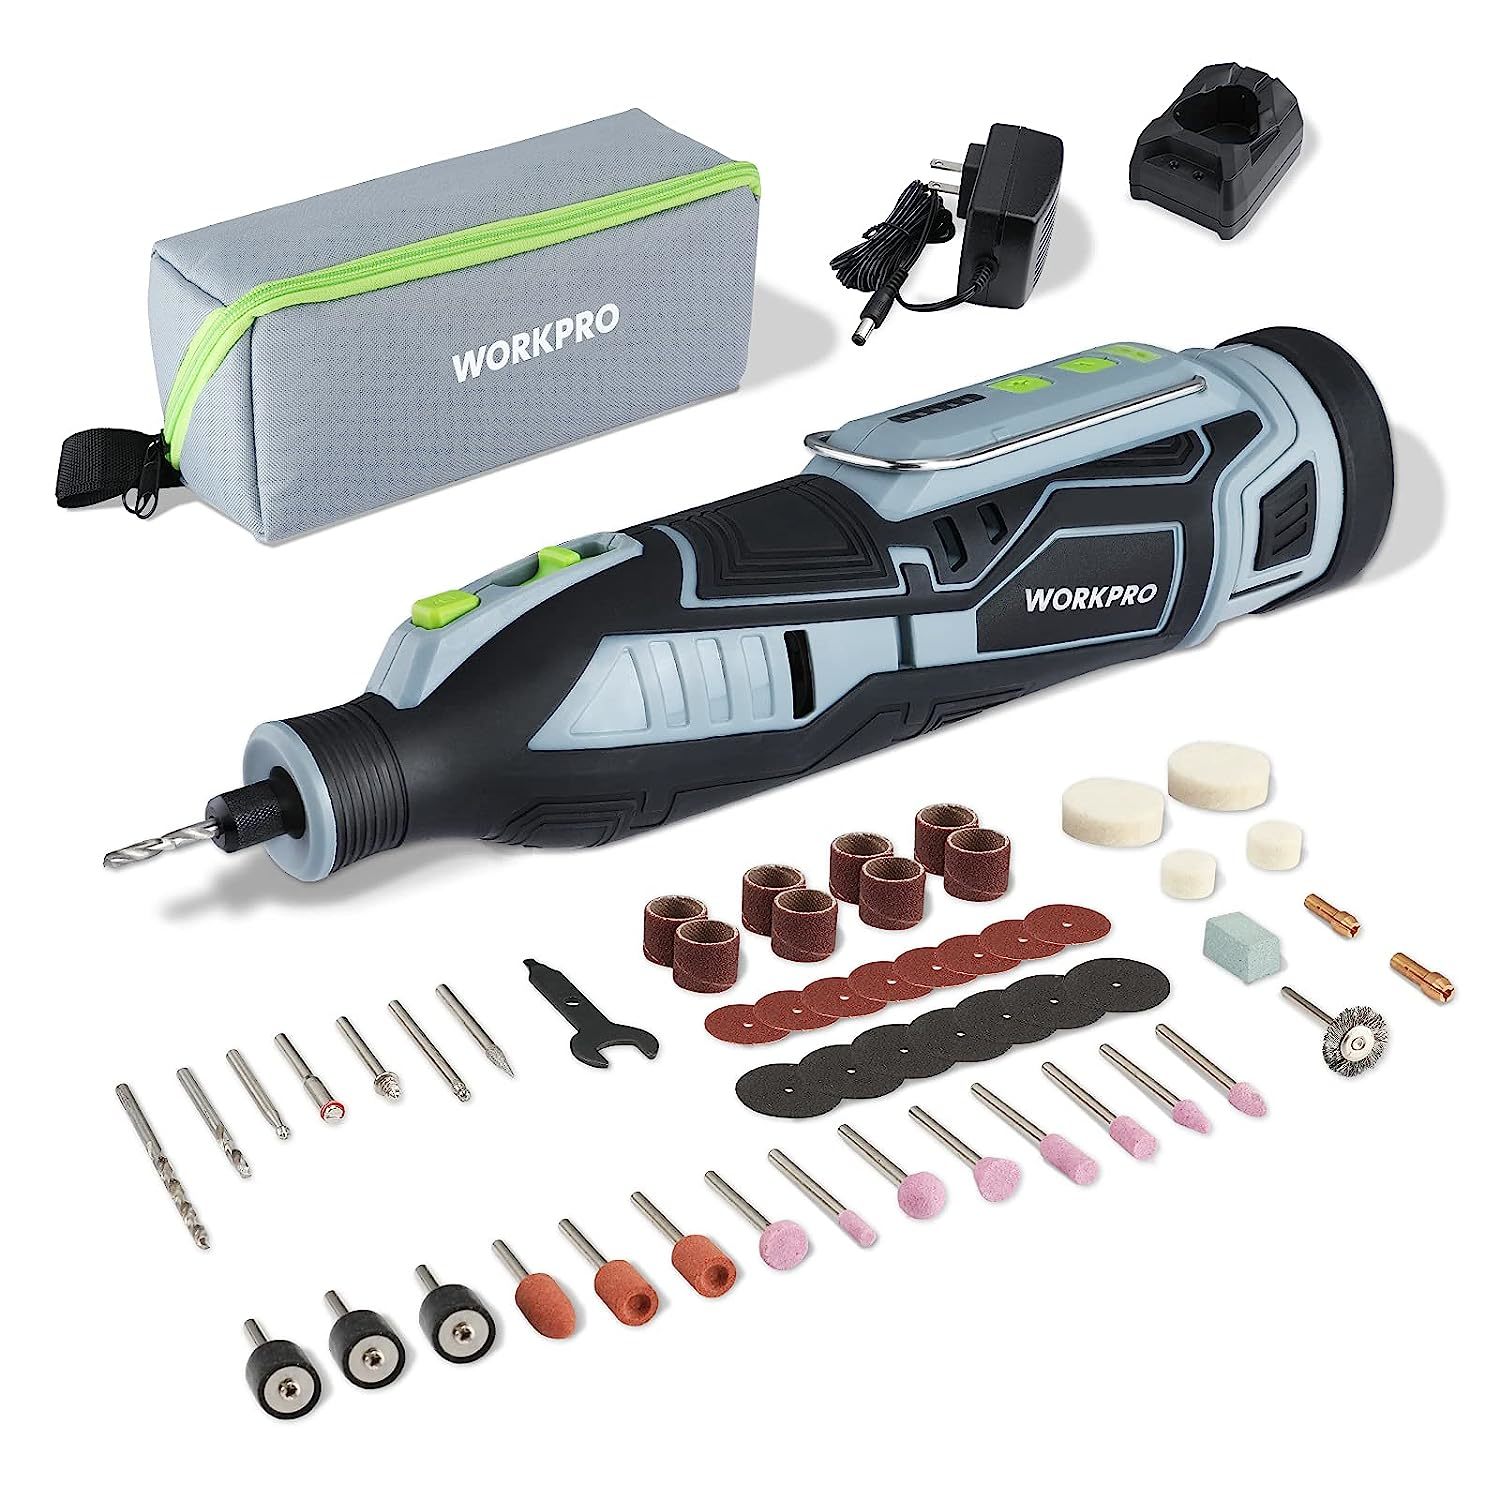 Primary image for WORKPRO 12V Cordless Rotary Tool Kit, 5 Variable Speeds, Powerful Engraver, Sand